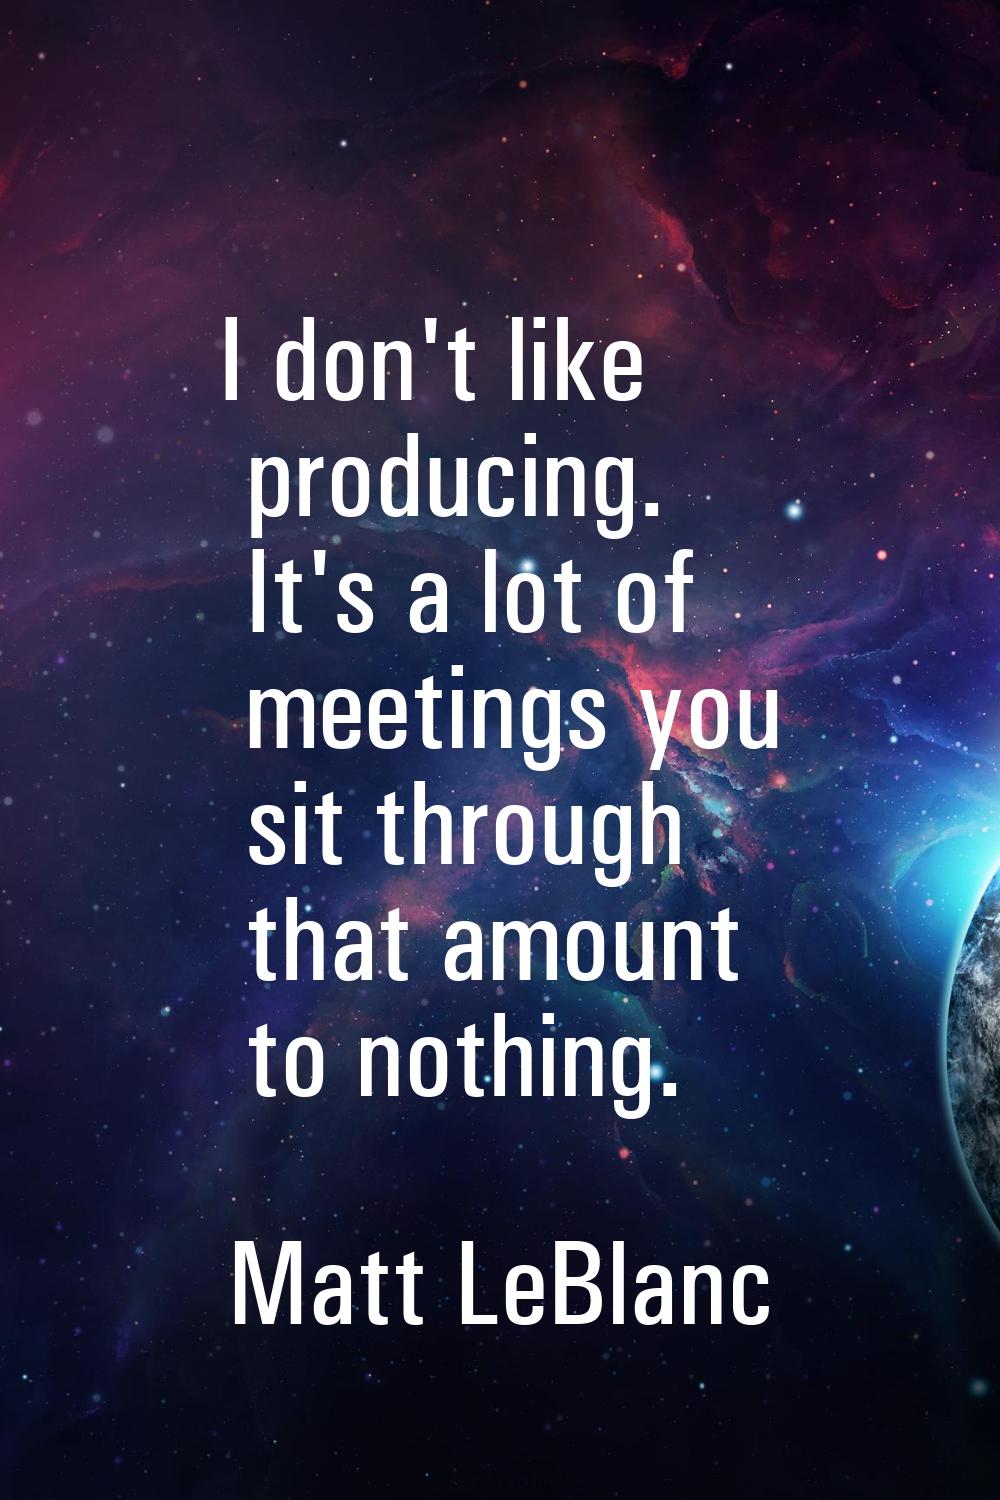 I don't like producing. It's a lot of meetings you sit through that amount to nothing.